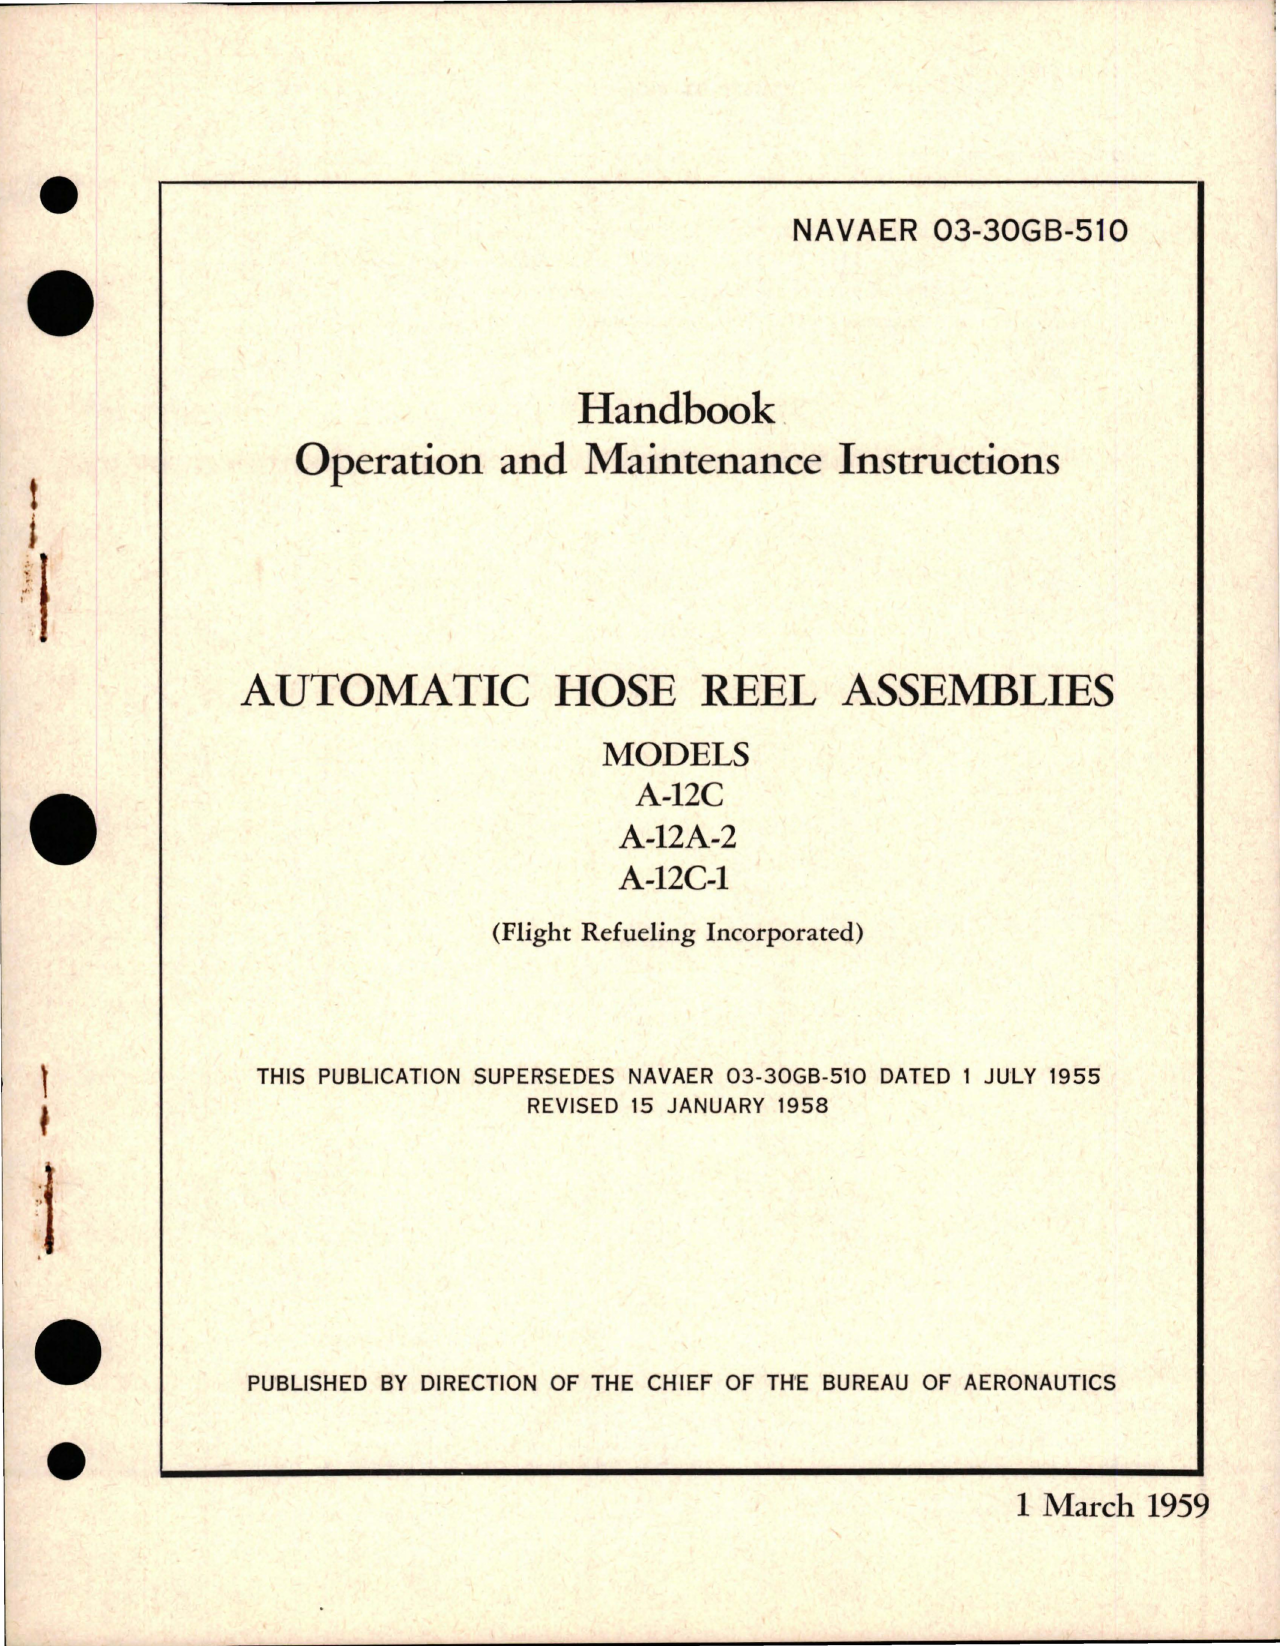 Sample page 1 from AirCorps Library document: Operation and Maintenance Instructions for Automatic Hose Reel Assemblies - Models A-12C, A-12A-2, and A-12C-1